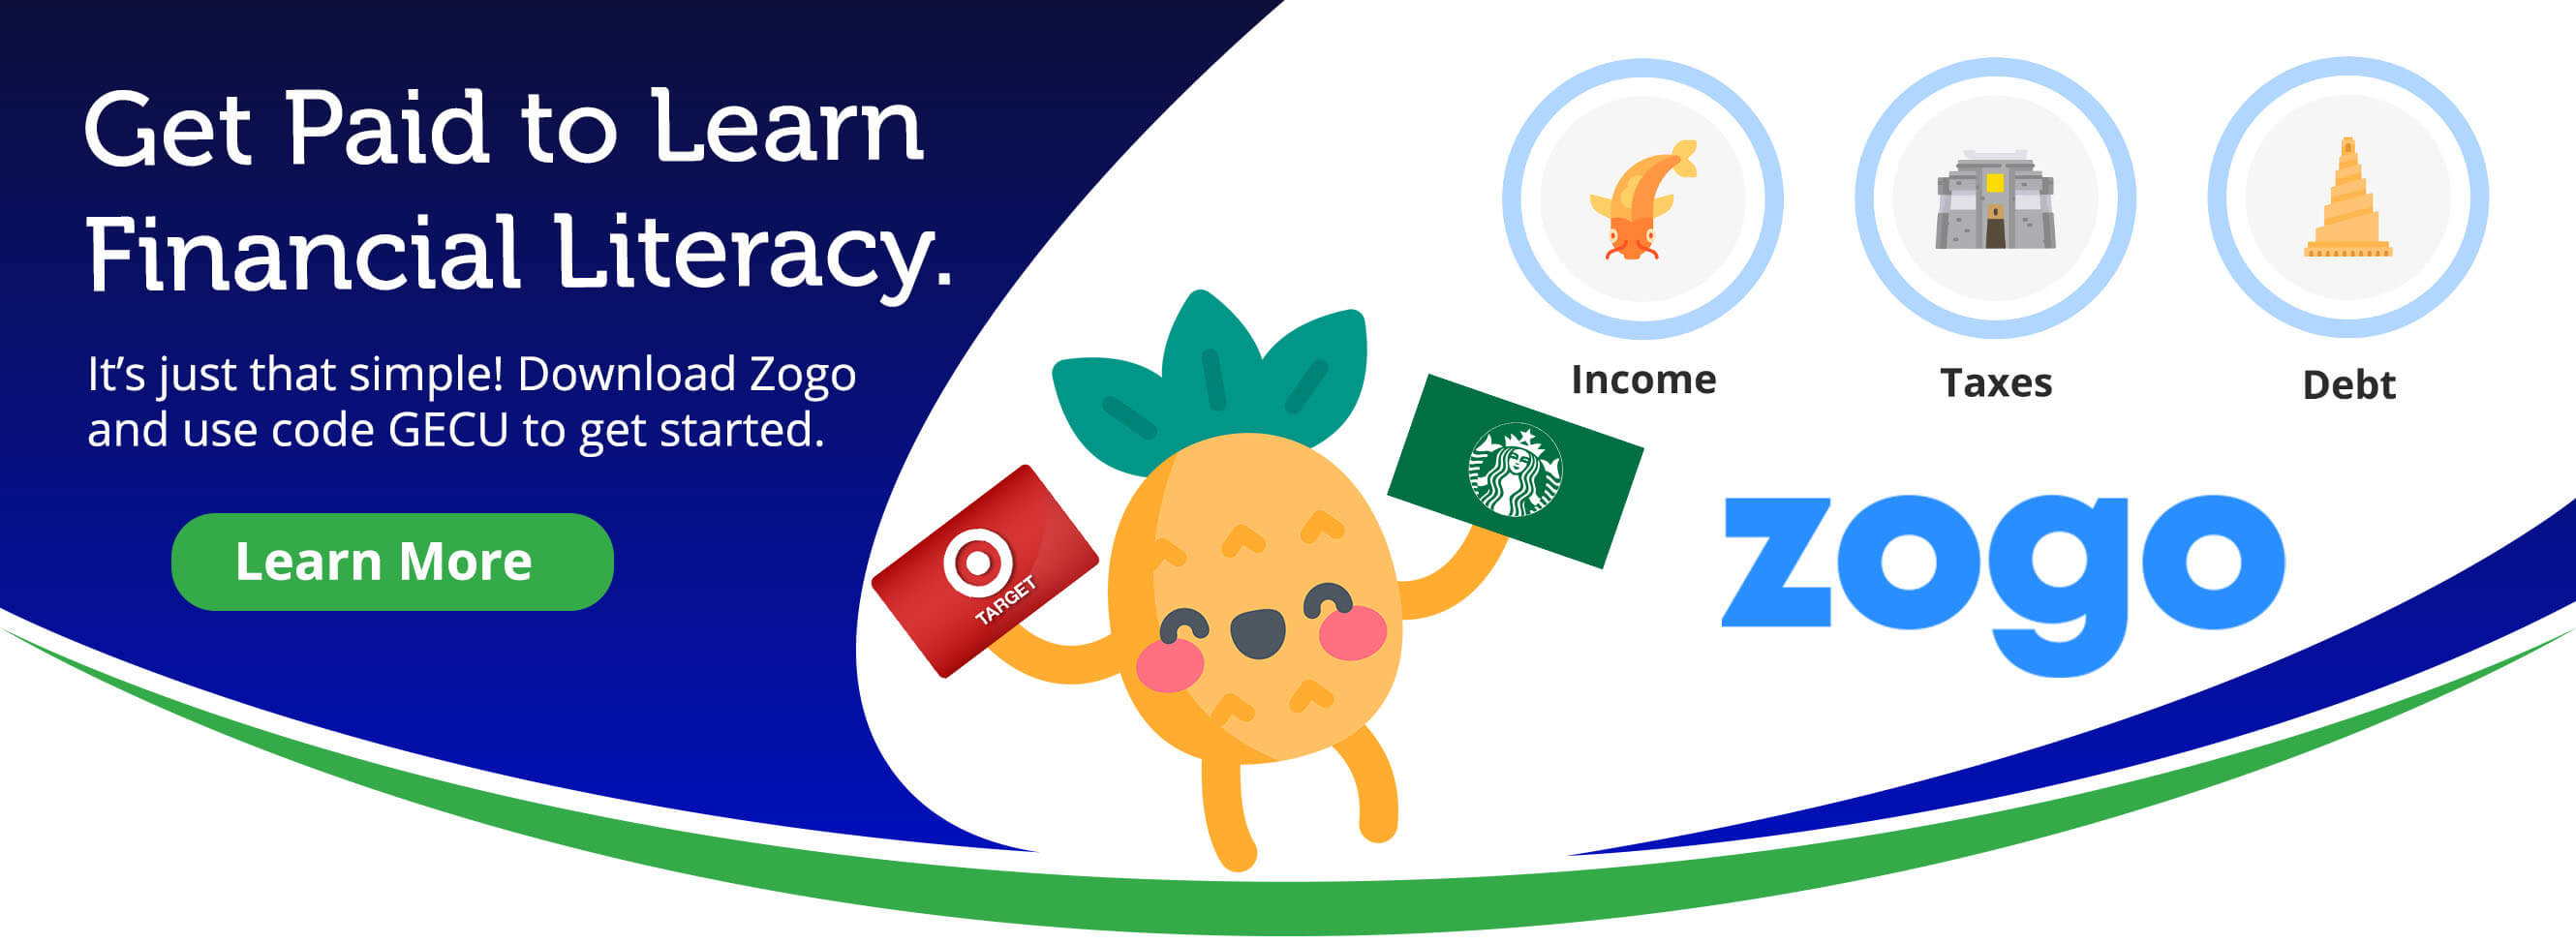 get paid to learn financial literacy. Its just that simple. Download zogo and use code GECU to get started. Learn More